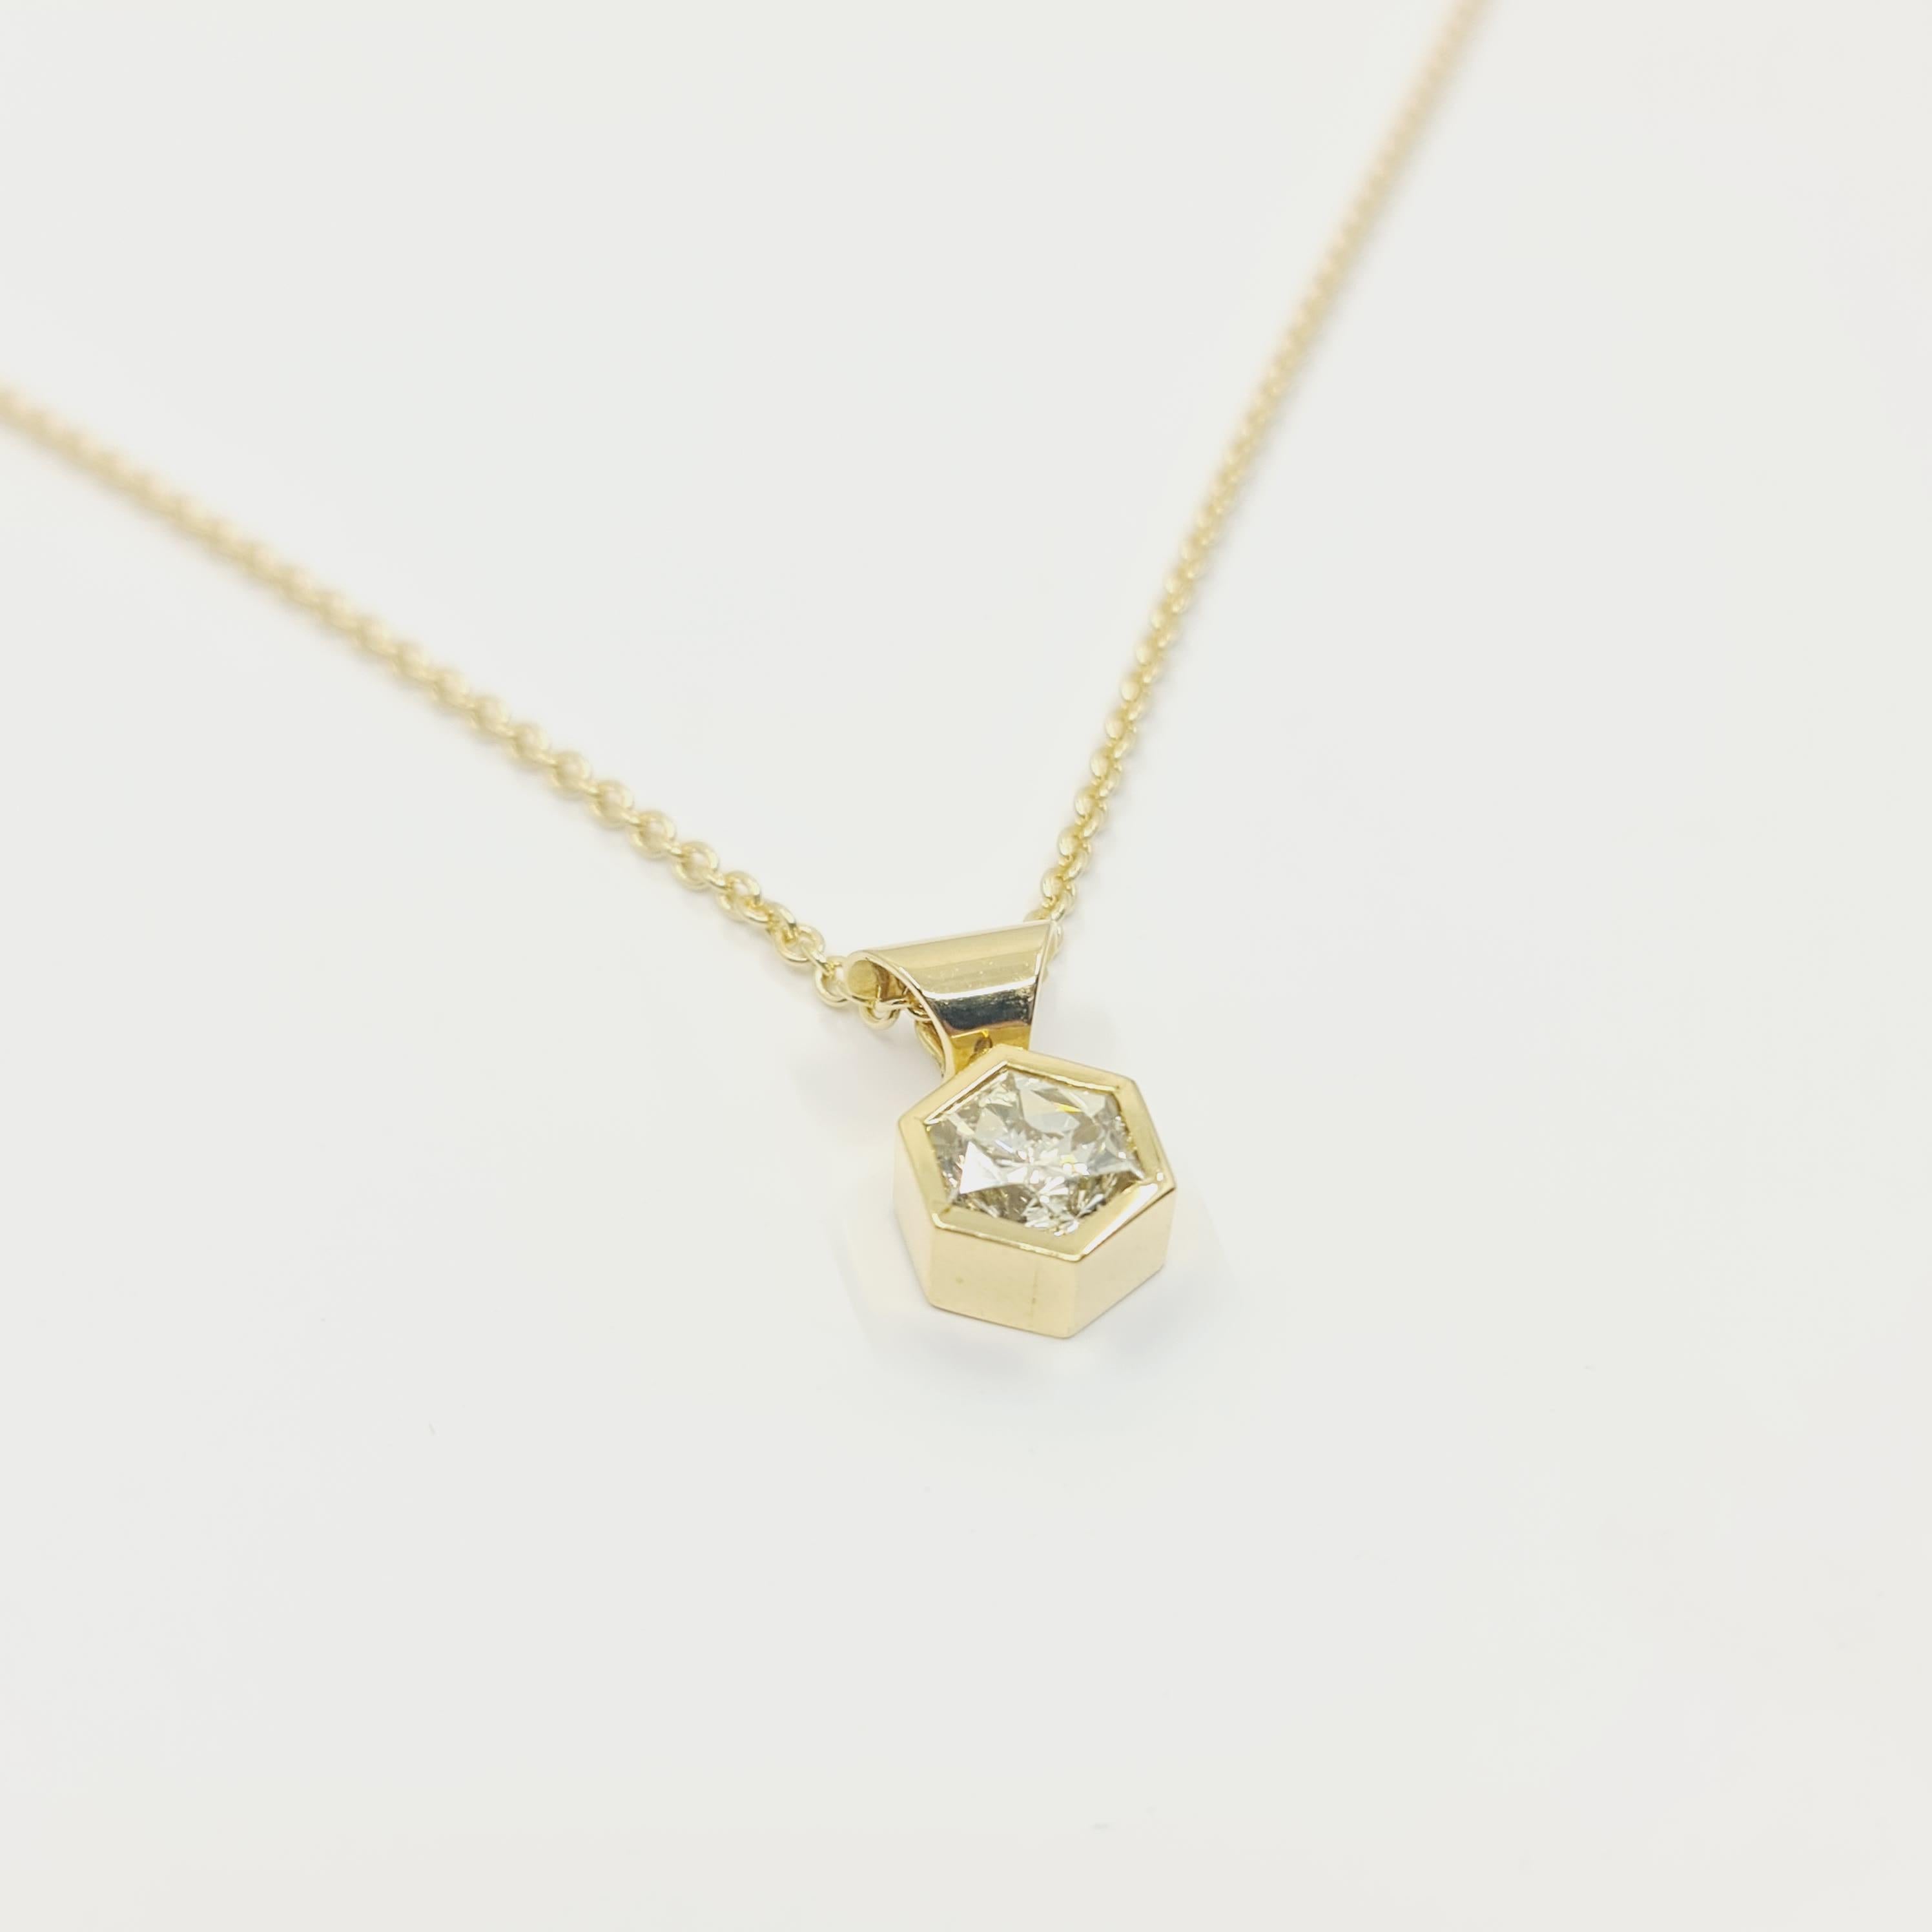 Women's HRD Certified 2.00 Ct. Diamond Necklace 750 Gold with Rare Hexagon Cut Diamond For Sale